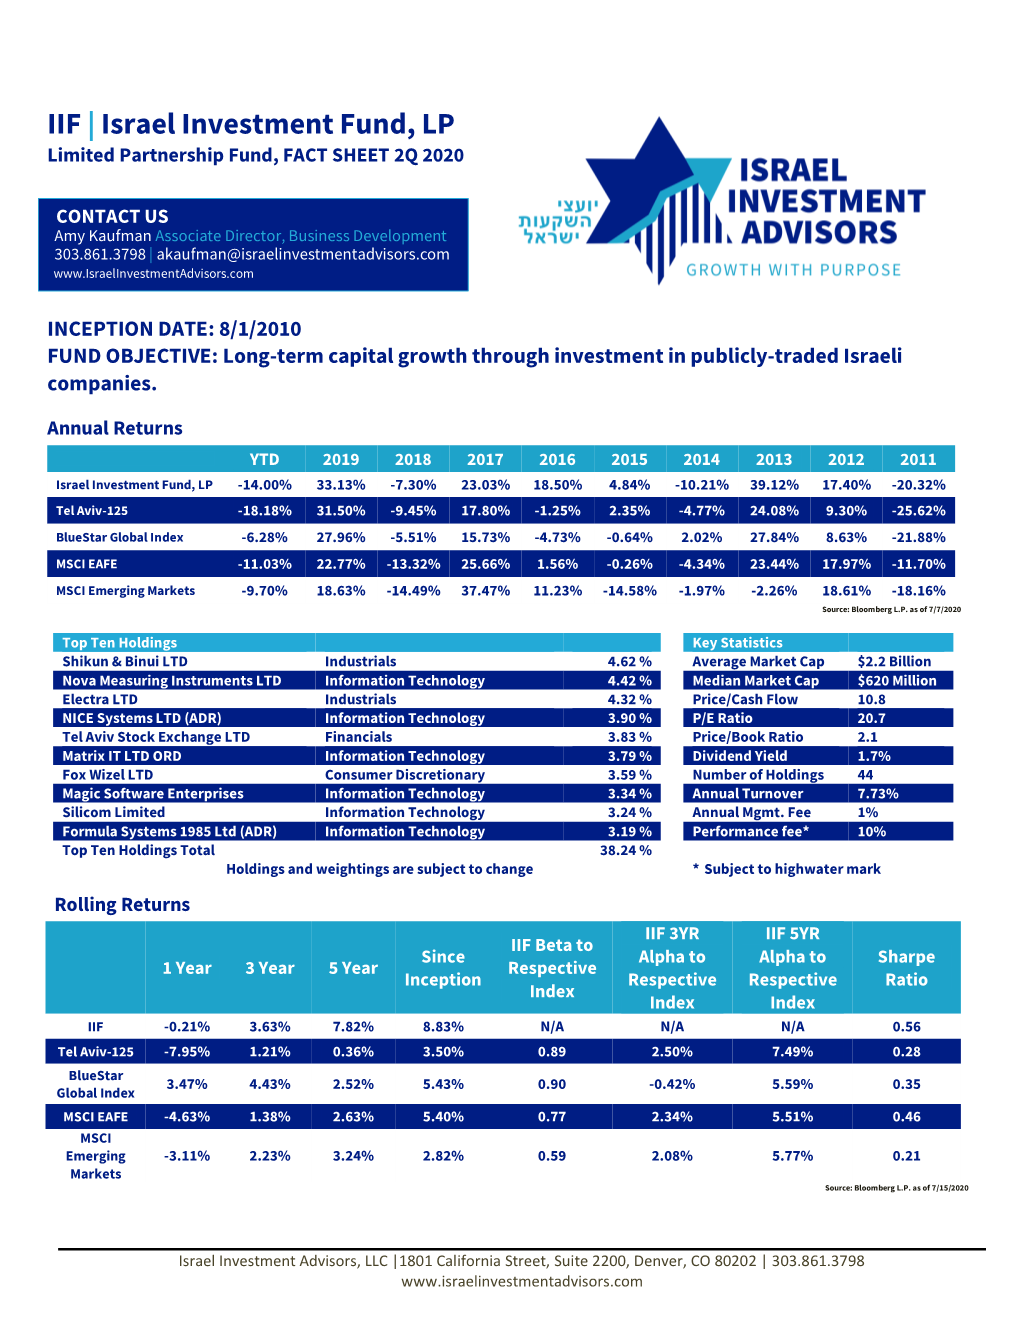 IIF | Israel Investment Fund, LP Limited Partnership Fund, FACT SHEET 2Q 2020